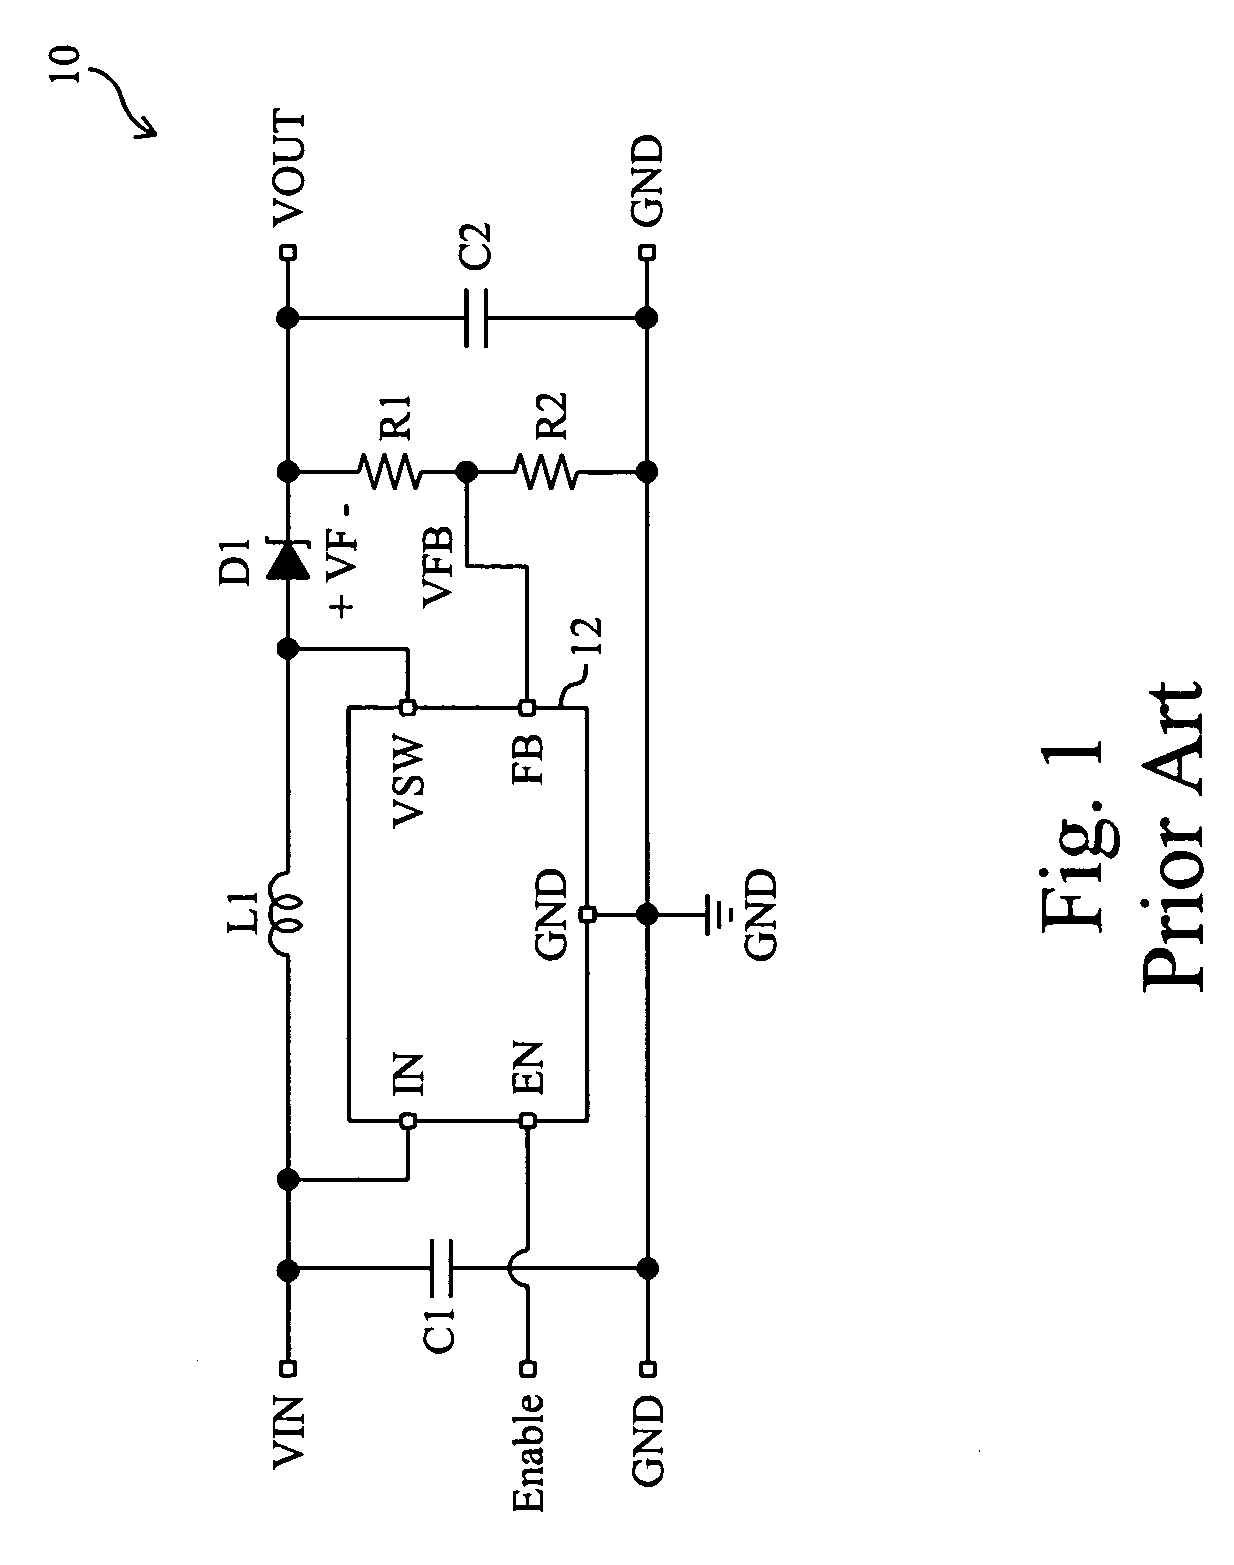 Non-synchronous boost converter including low-voltage device for load disconnection